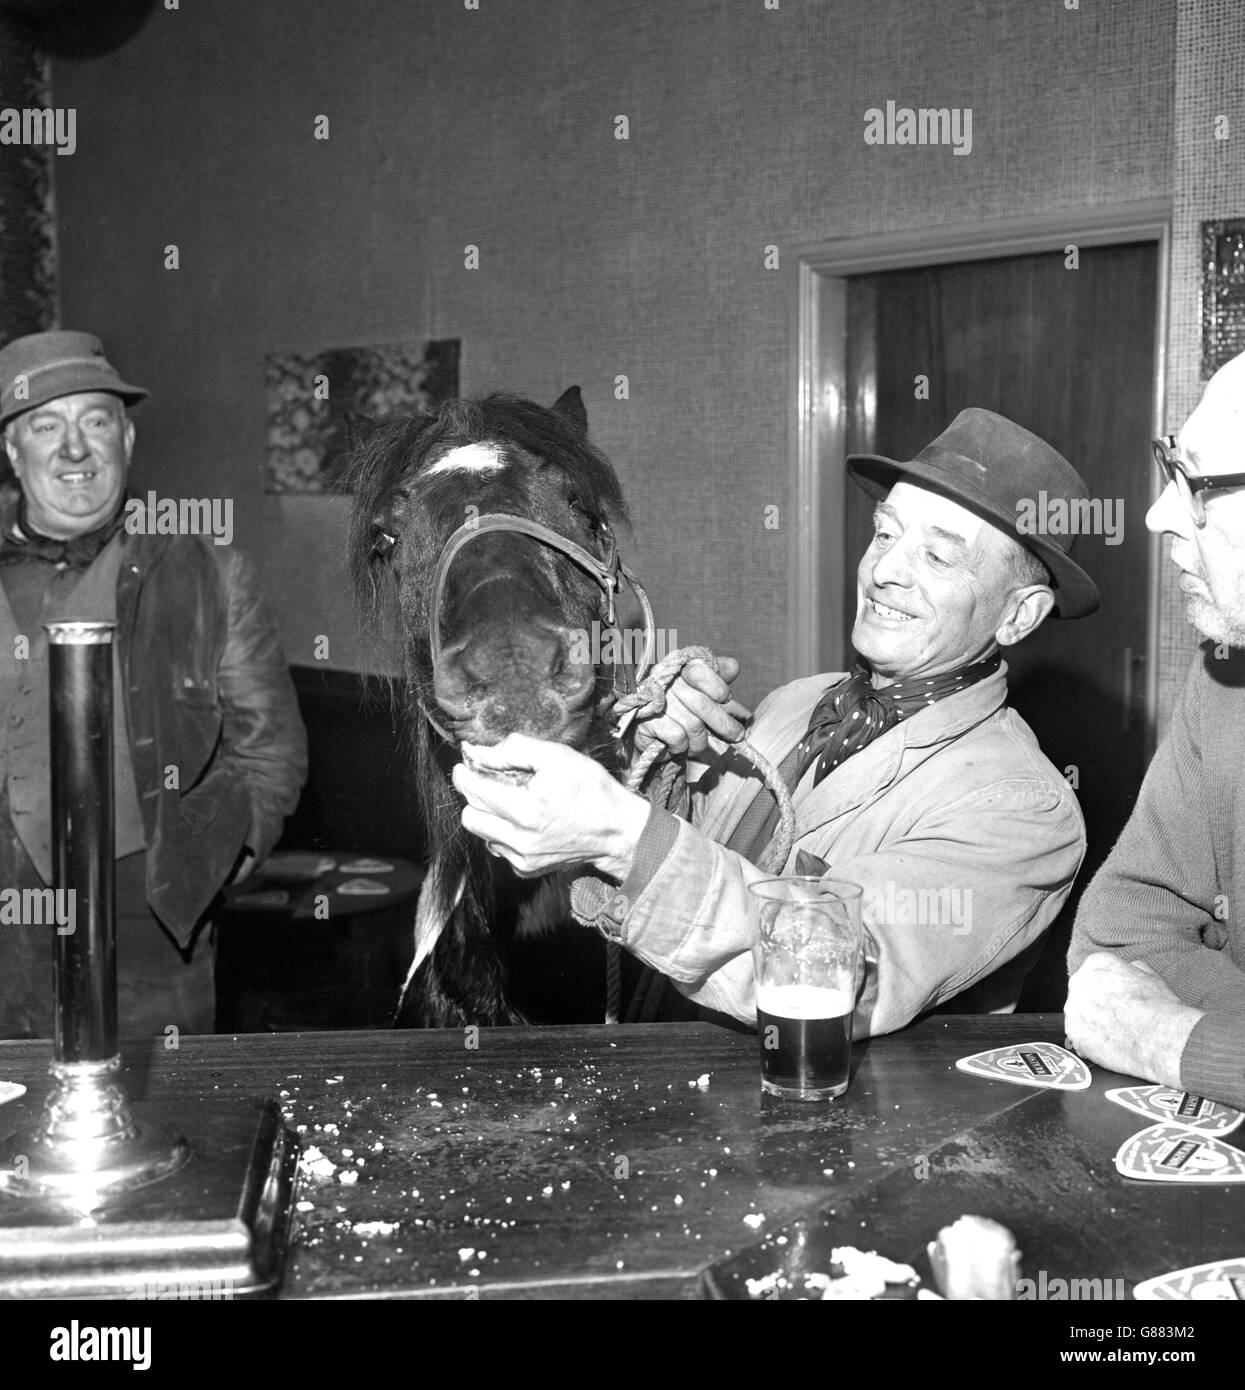 Barney the horse enjoys a visit to The Old White Bear public house in Tingley, with his owner Harry Lacey, a rag collector. Barney is a regular visitor the pub, after spending his work days pulling Harry's cart to Bradford and back. 'It does him the world of good and there's no holding him when he gets near the pub', said Mr Lacey. 'Talk about leading a horse to water - this one thrives on beer and pies.' Stock Photo